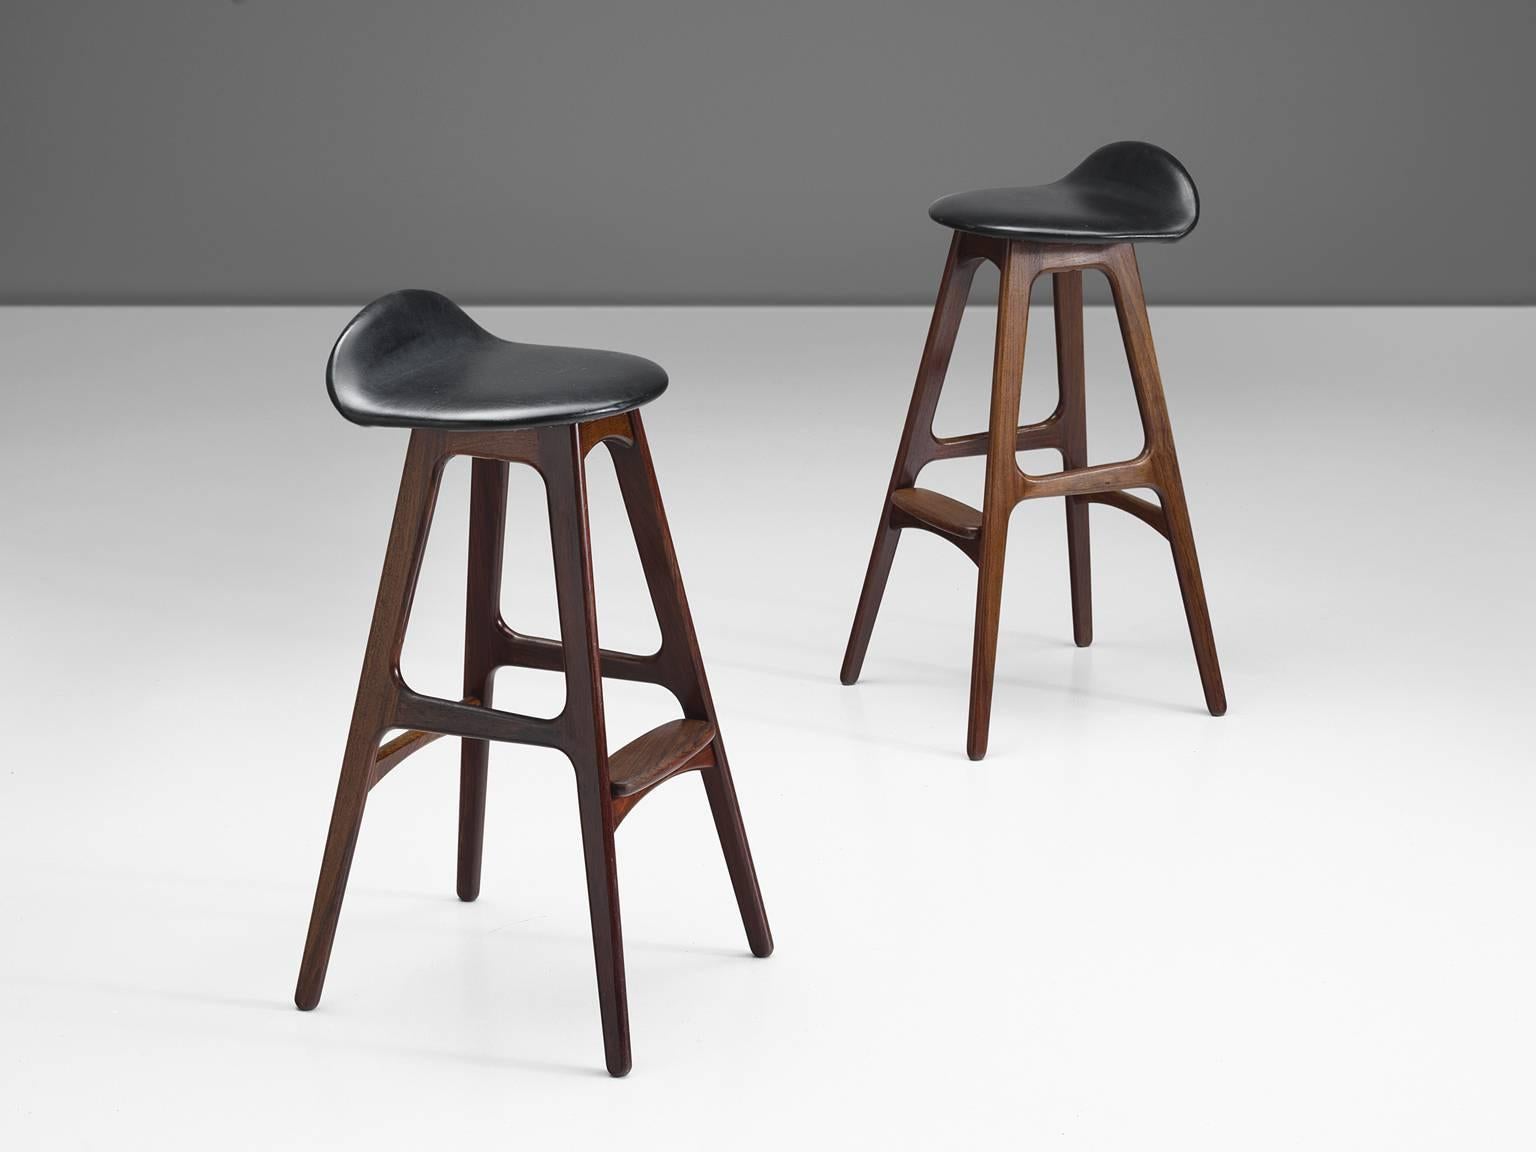 Set of two Erik Buch for O.D. Mobler, bar stools, rosewood and faux leather, Denmark, circa 1960s.

Distinctive set of two barstools by Erik Buch (1923-1982). Buch had over 30 commercially successful production designs over his career but none so